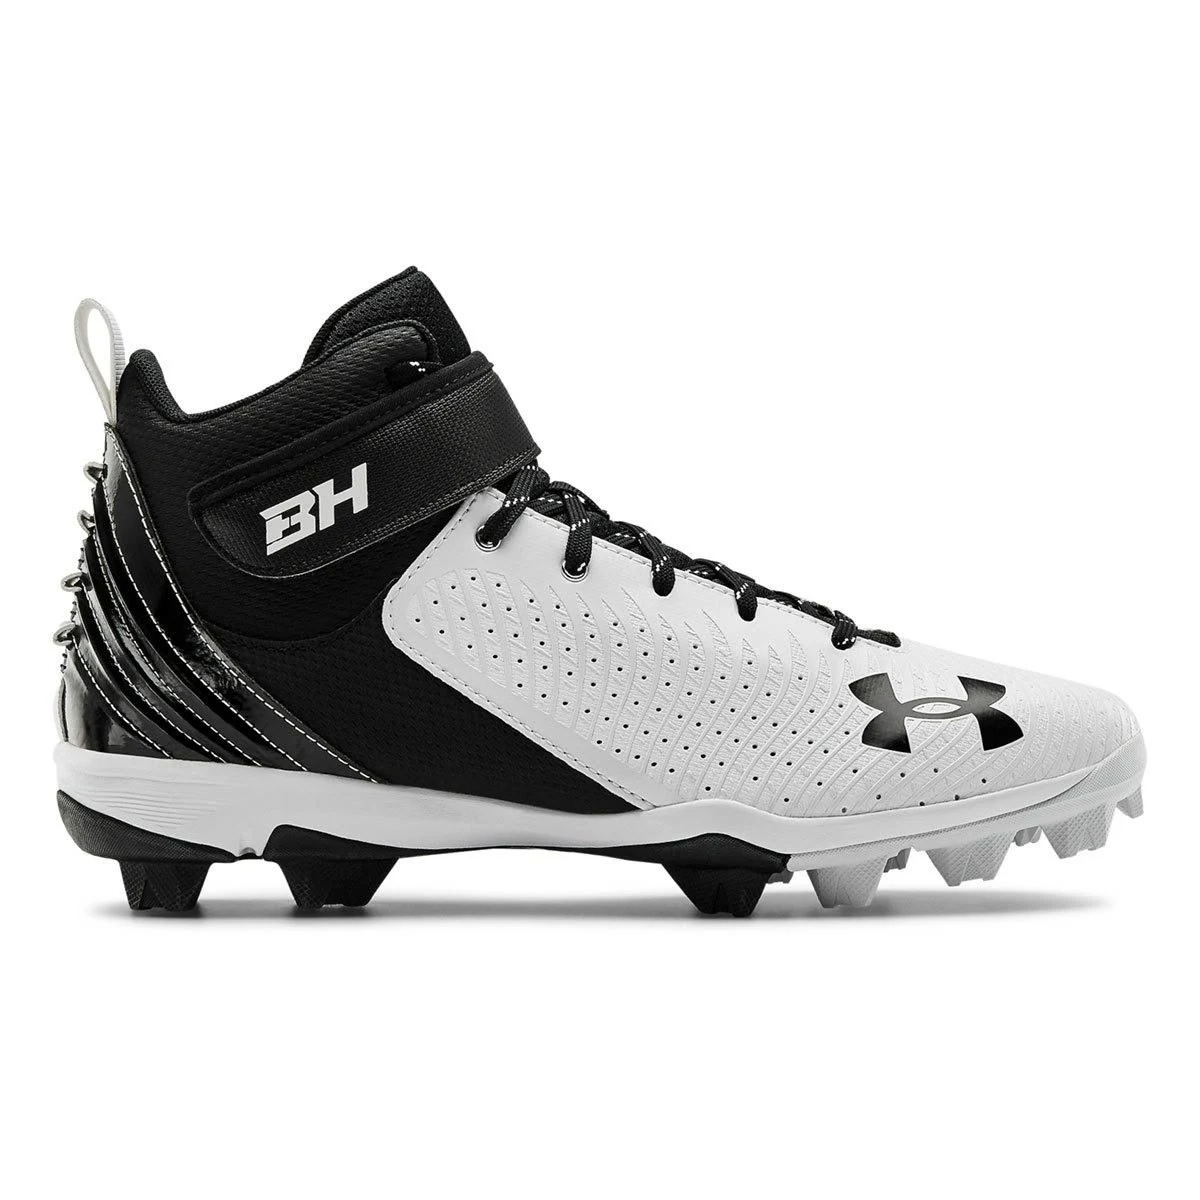 A photo of the Under Armour Junior Harper 5 Mid RM Cleats in colour white and black side view.